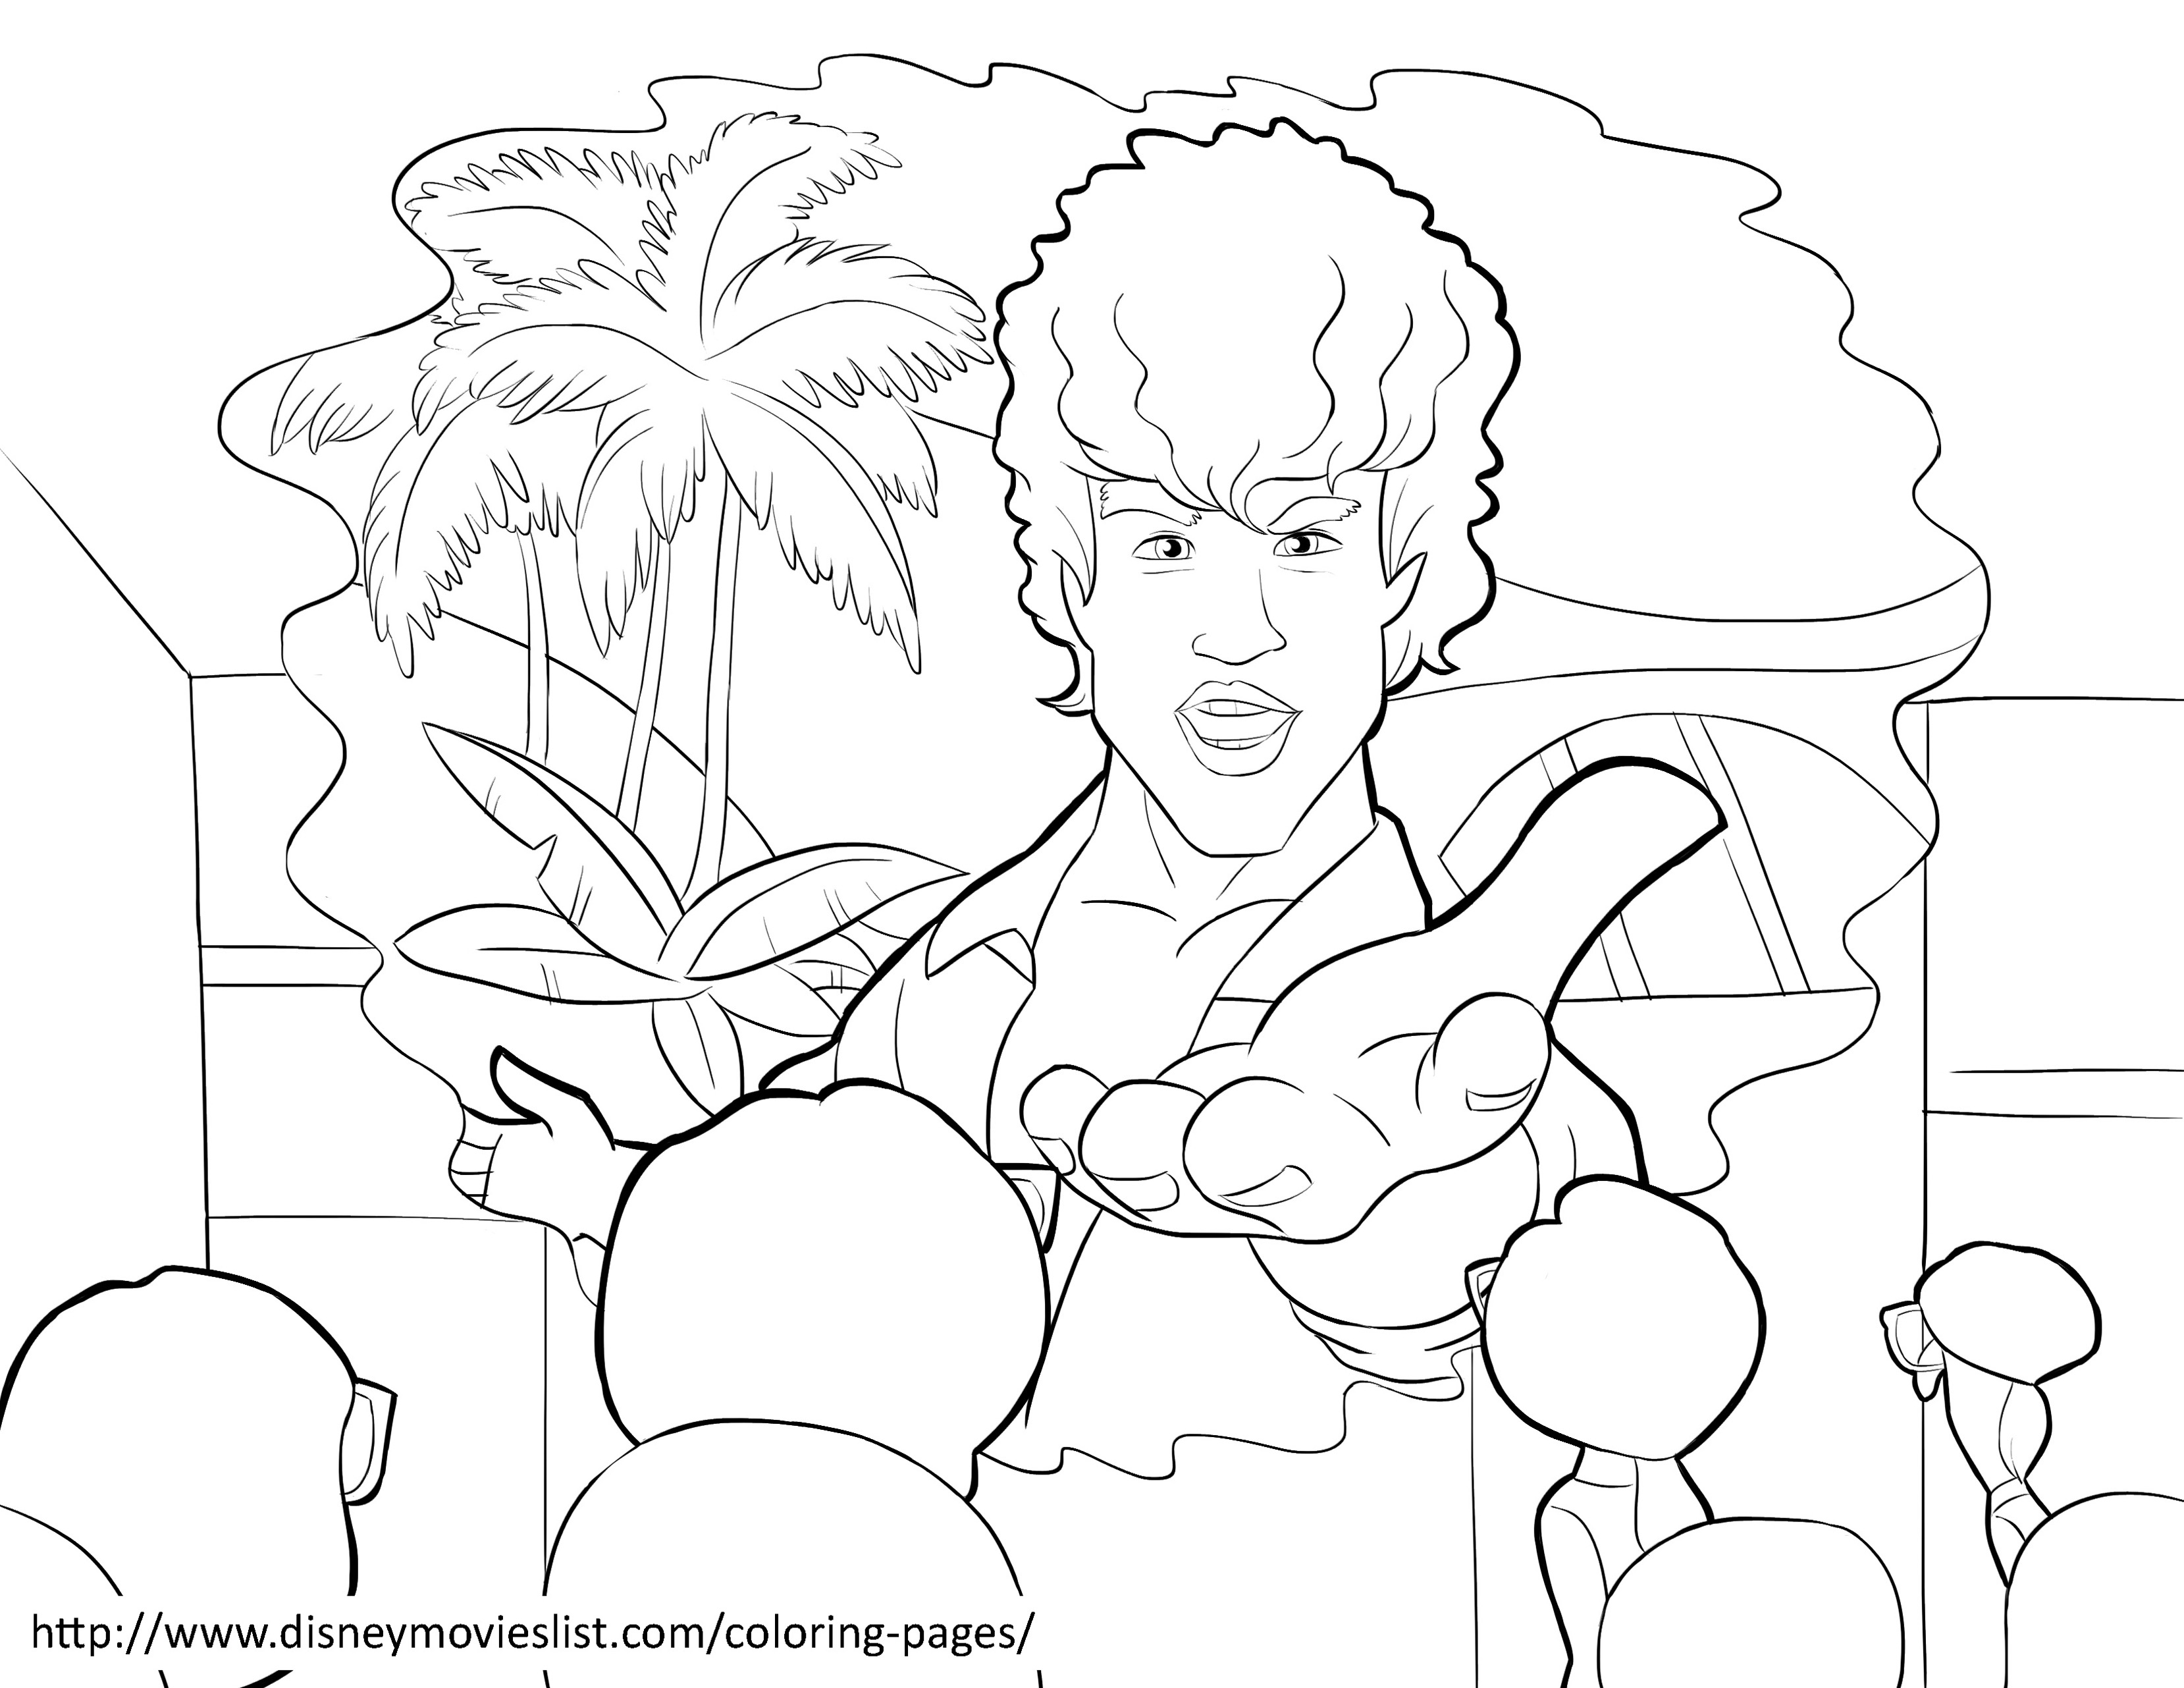 Simple Inside Out coloring page : the beautiful Brazilian